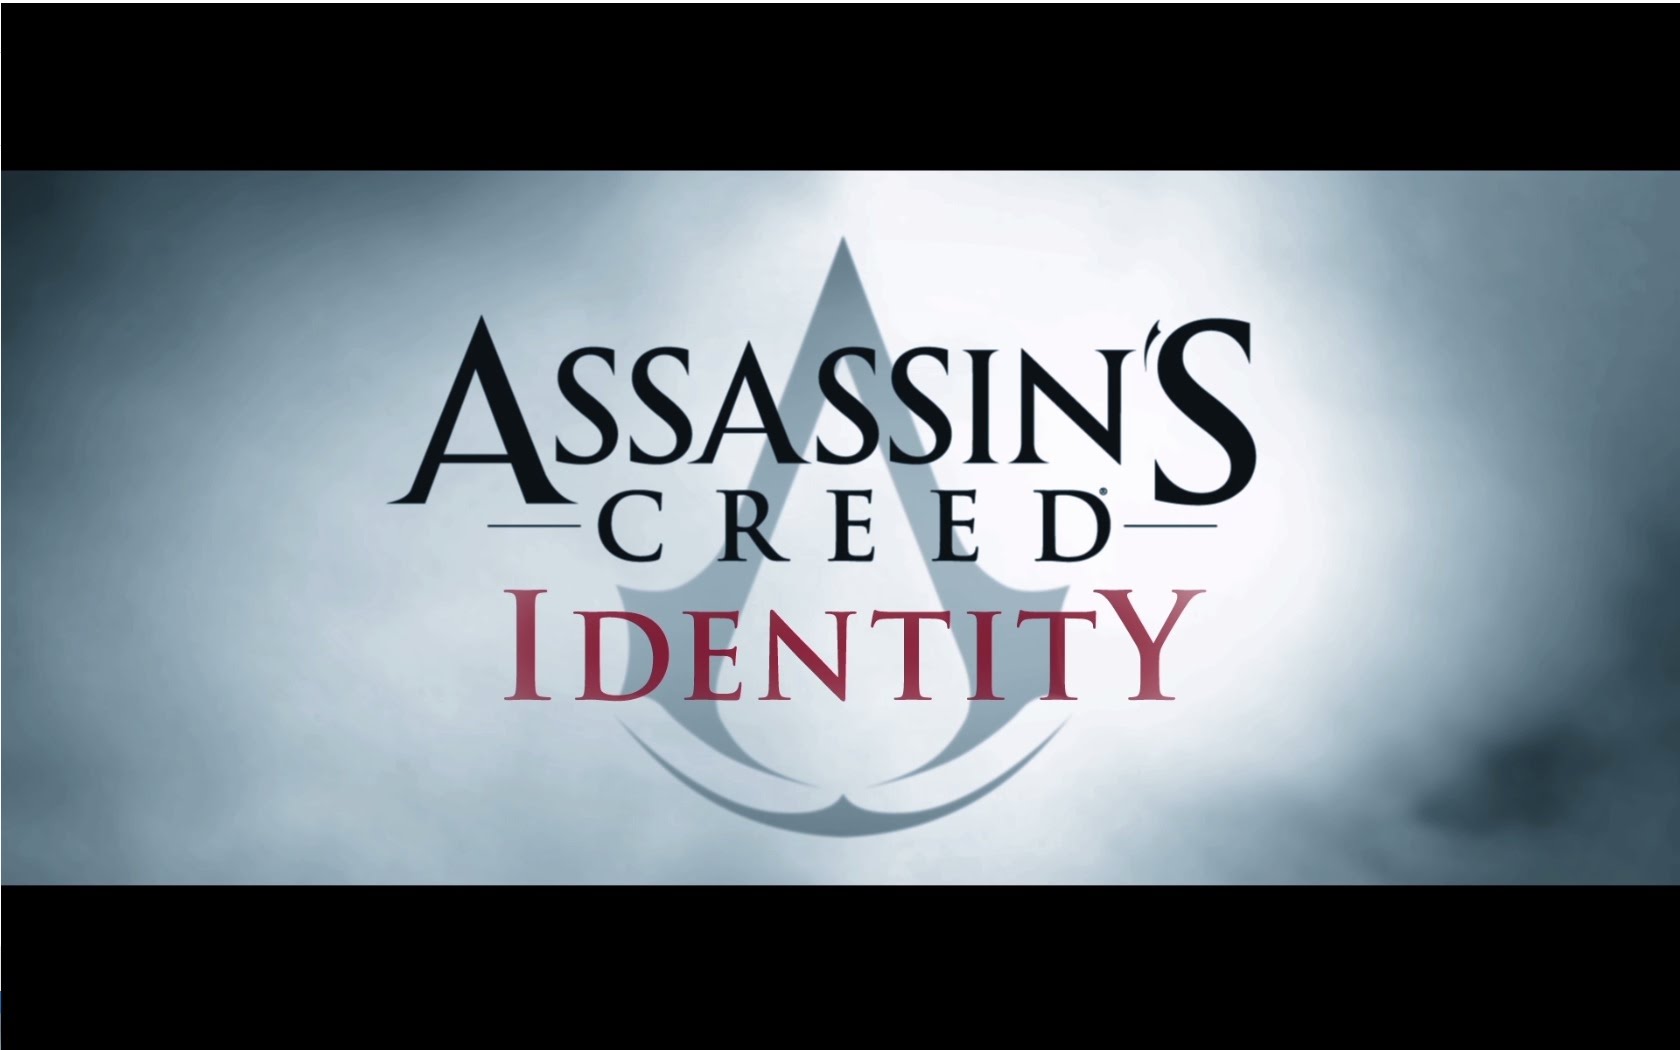 Assassin's Creed Identity - Announcement Trailer